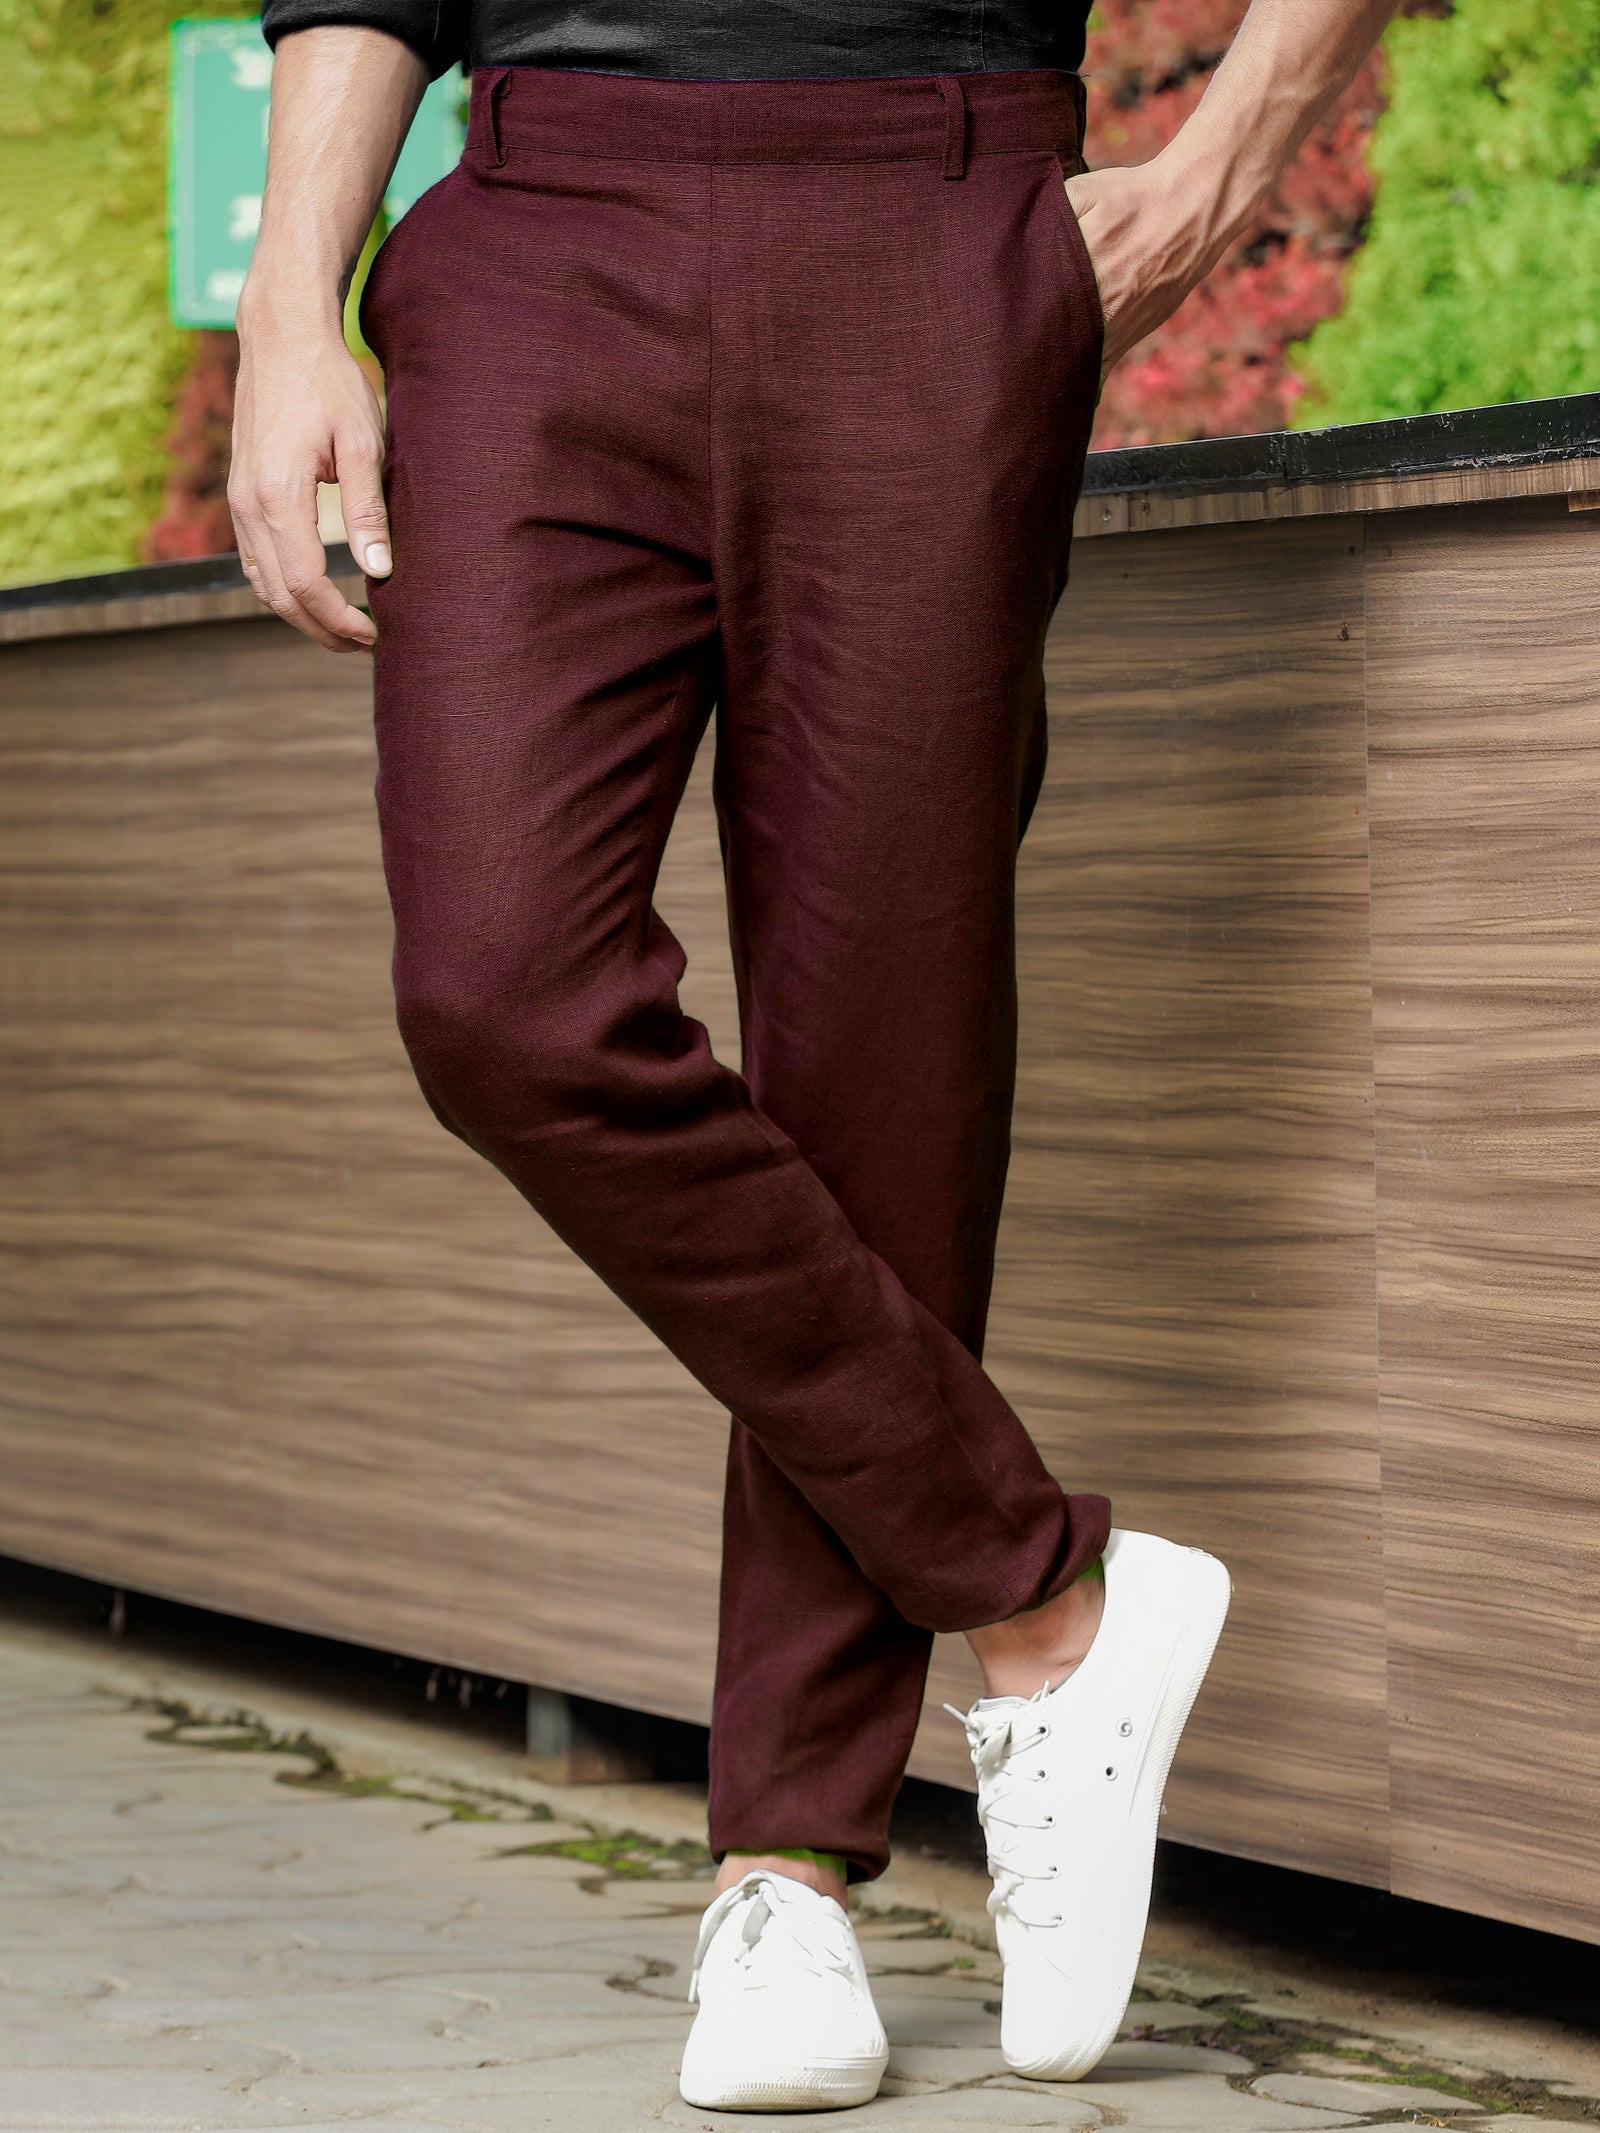 Burgundy Pants Winter Outfits For Men (13 ideas & outfits) | Lookastic